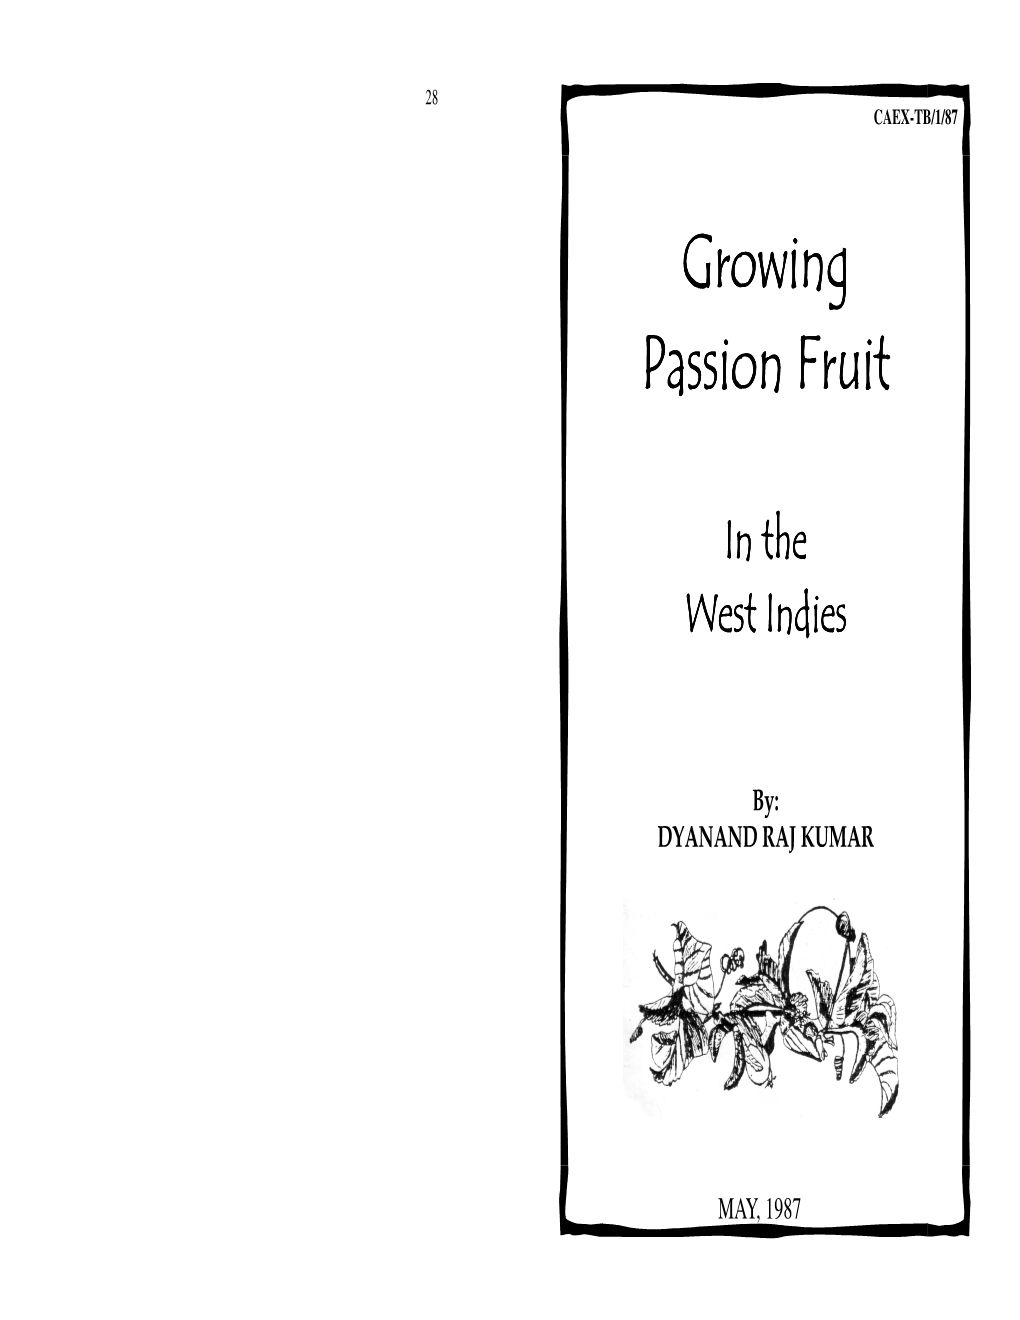 Growing Passion Fruit in the West Indies